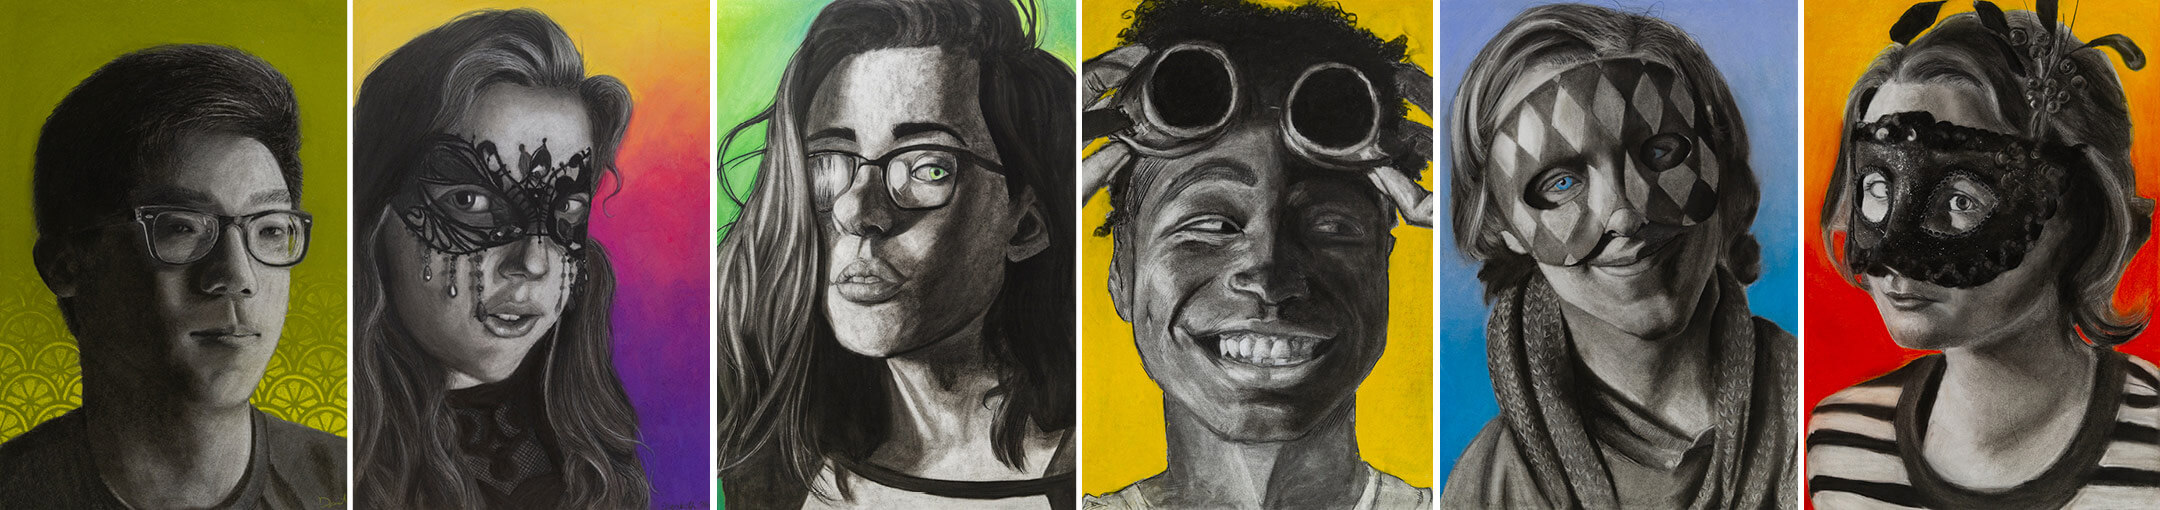 A collection of self-portraits by students